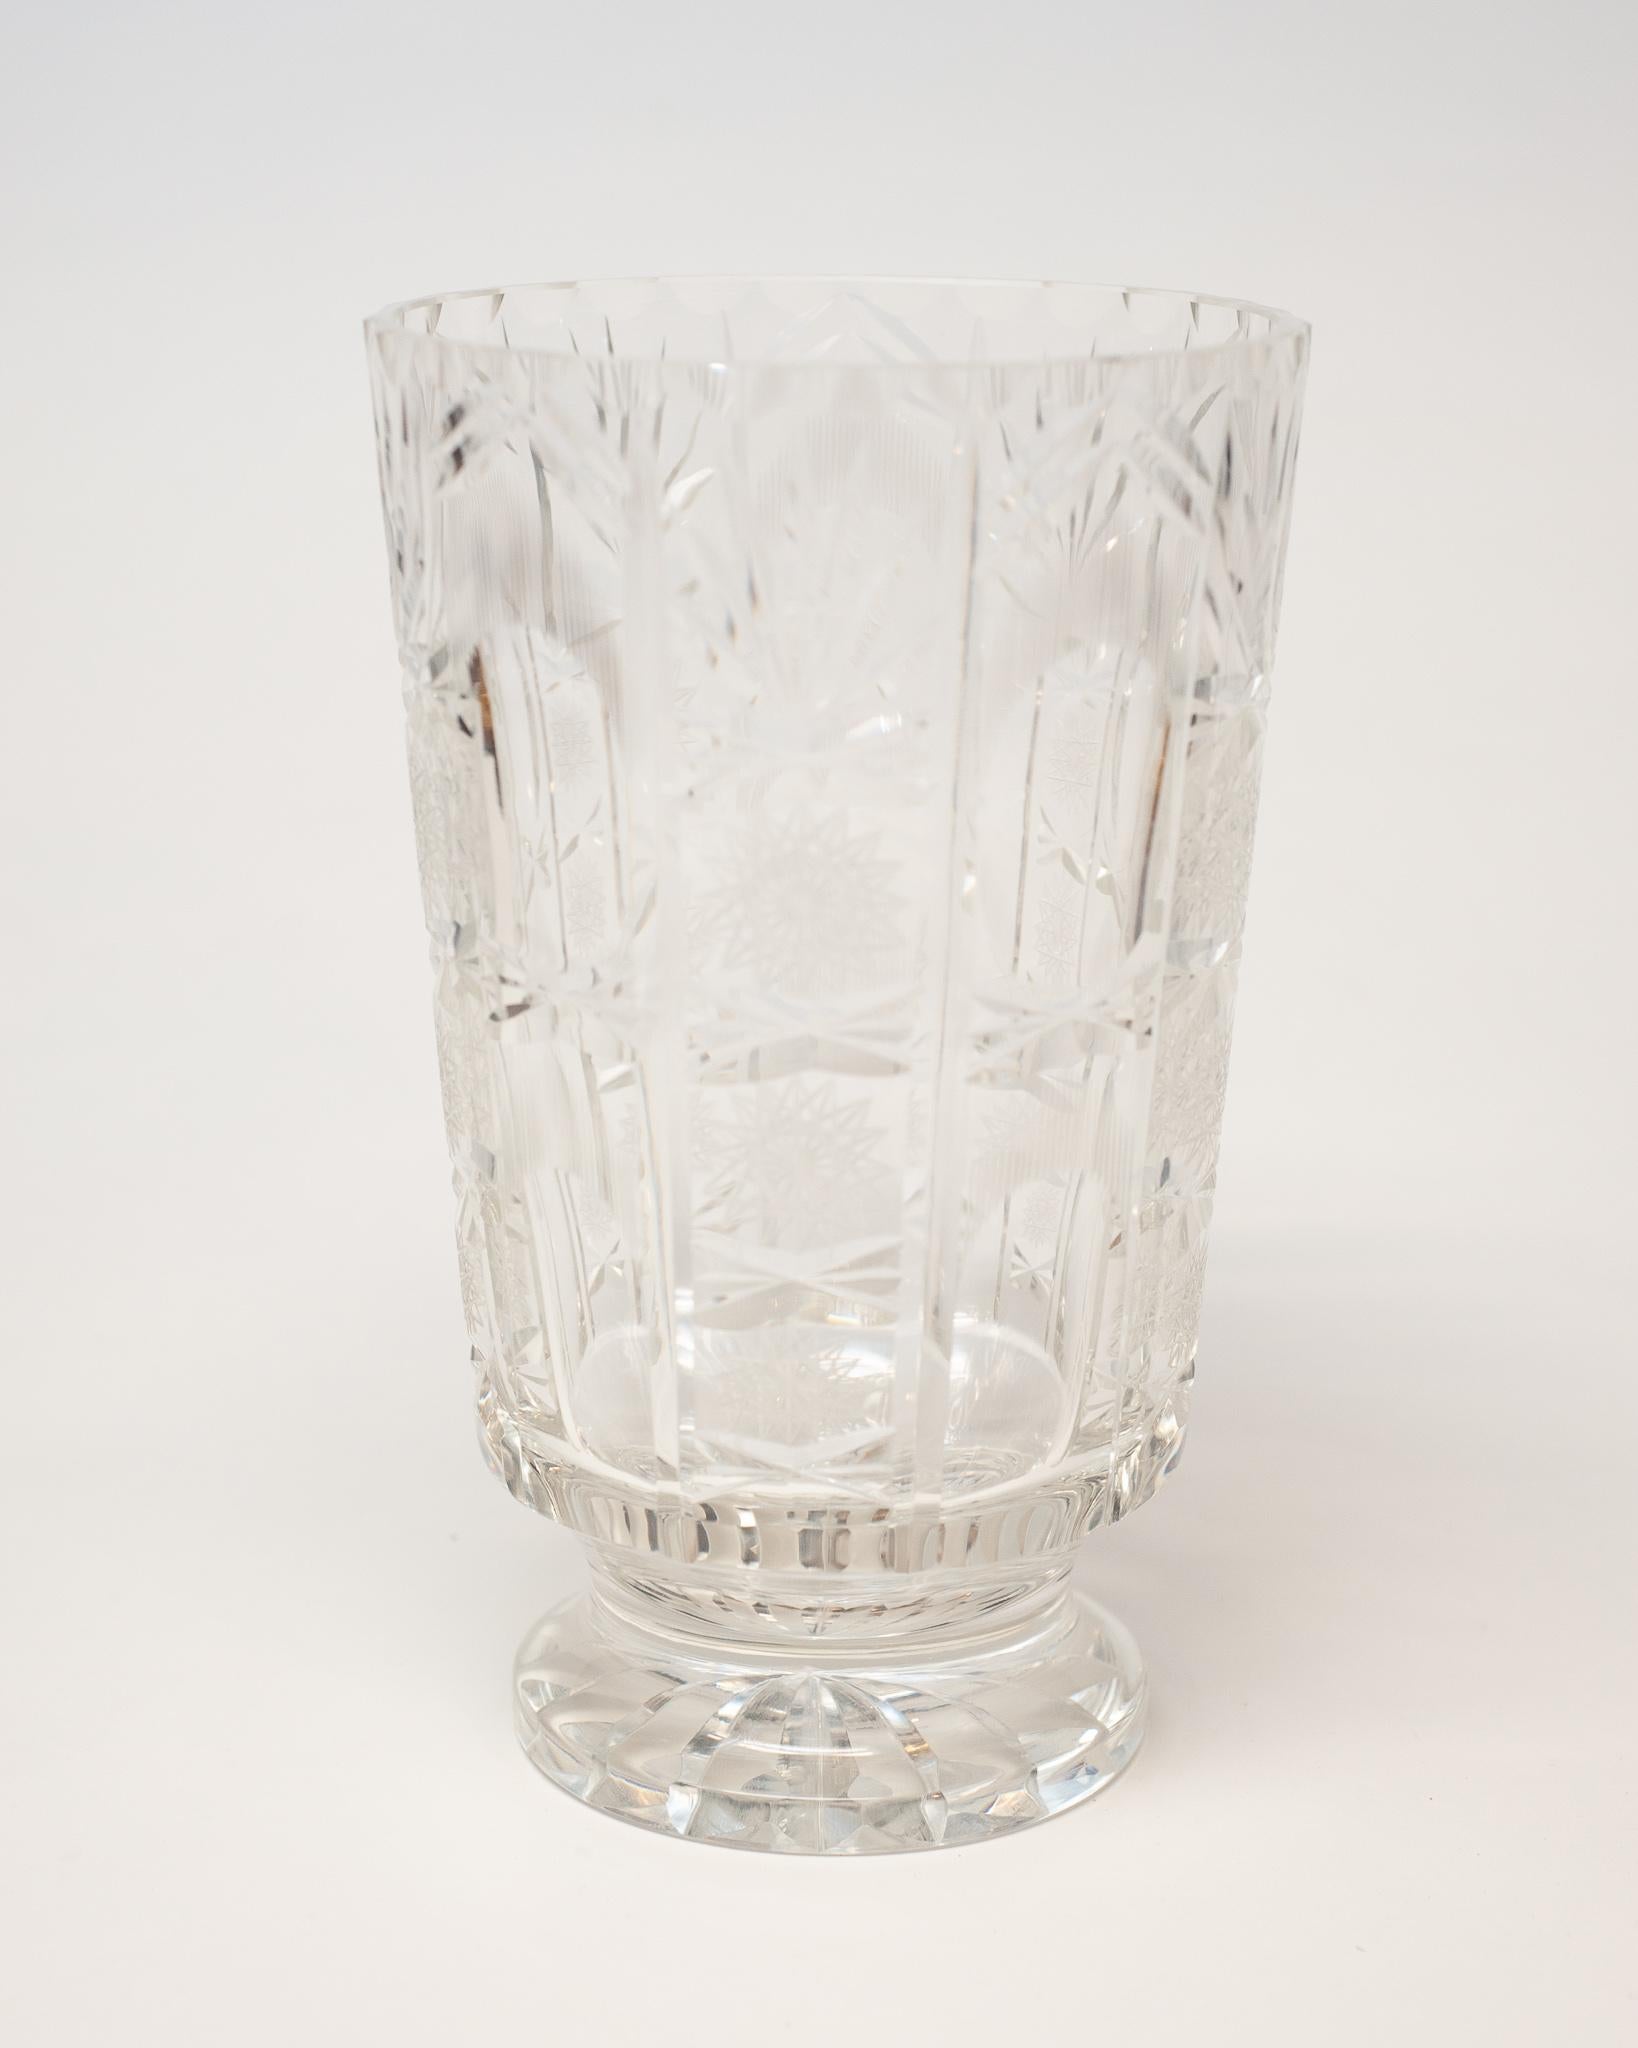 This antique Irish large cut crystal vase is a Classic accessory that is easy to place in any home.